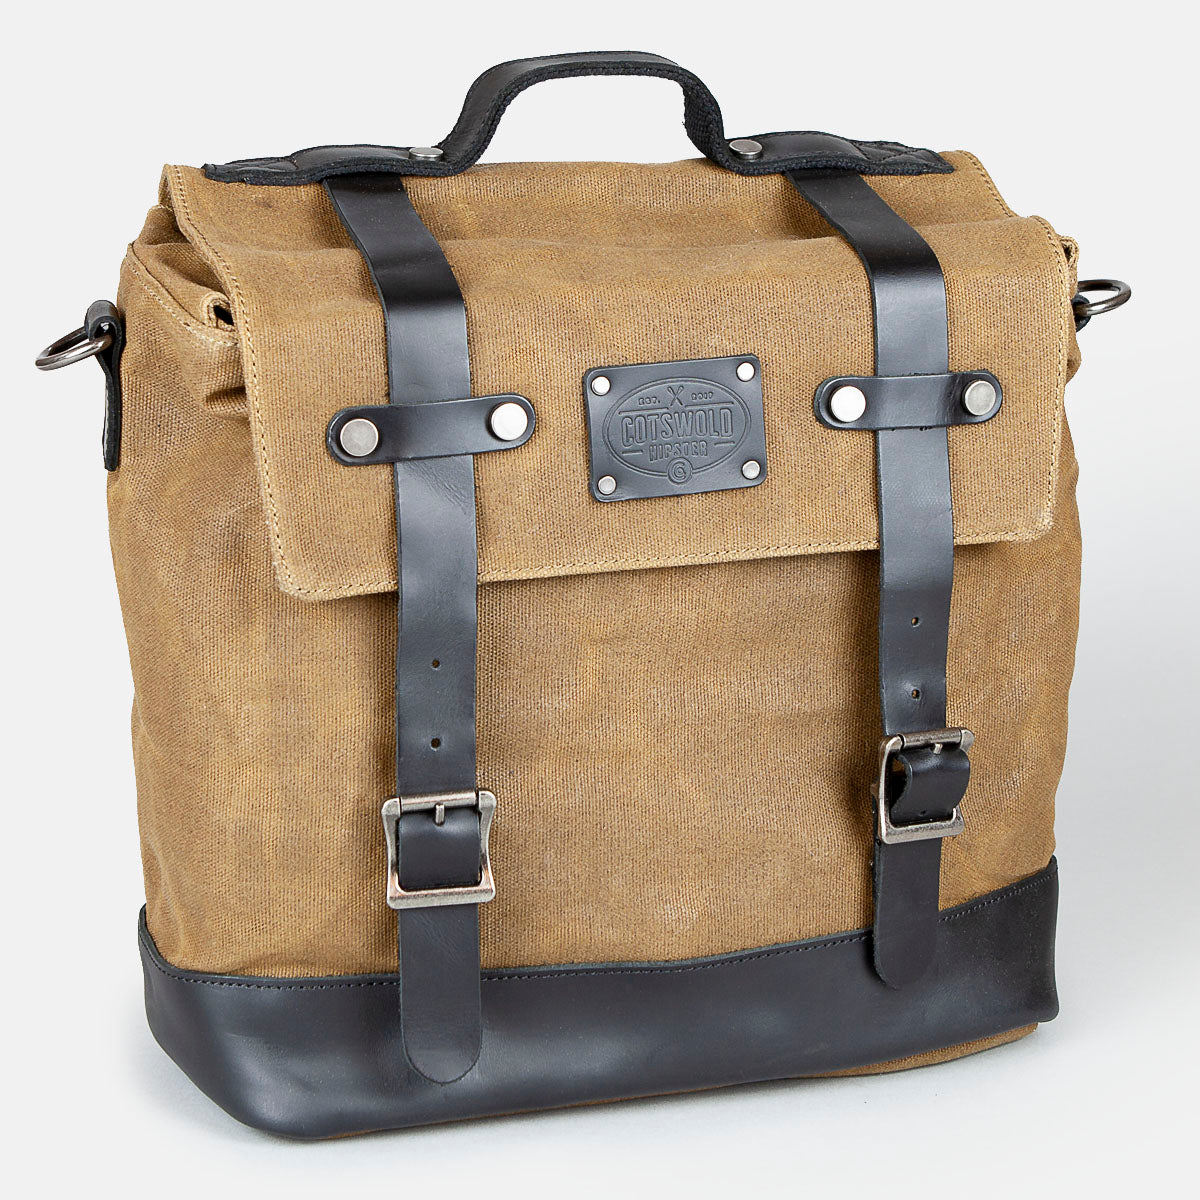 Waxed canvas and leather motorcycle pannier messenger bag by Cotswold Hipster The Tetbury